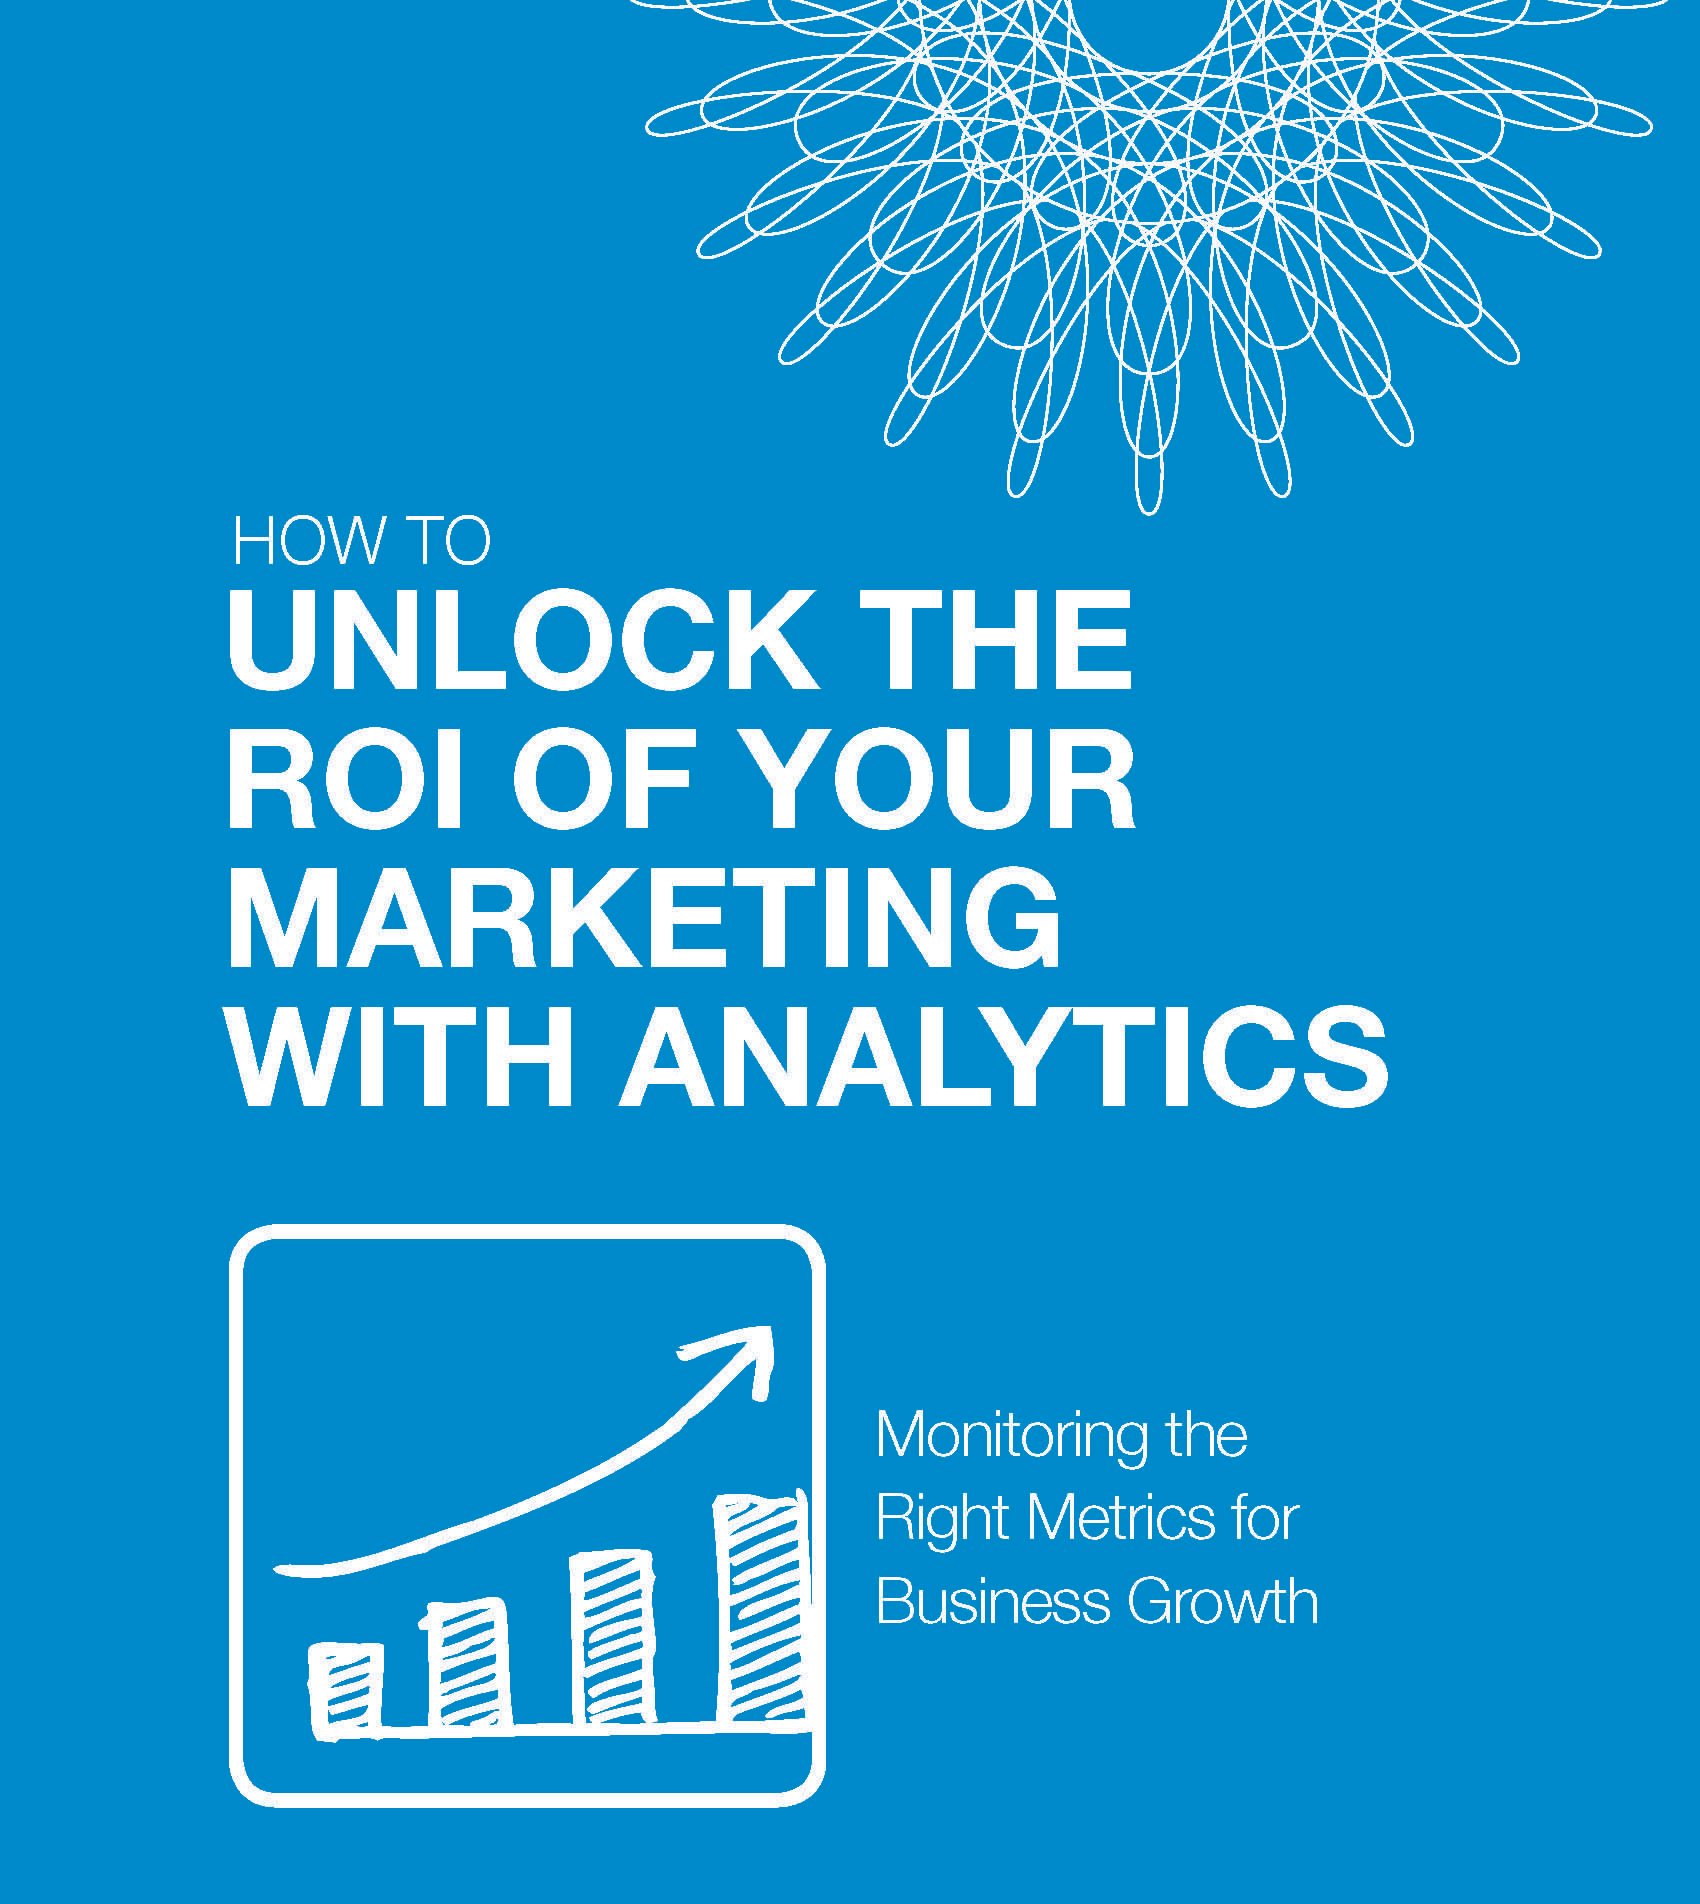 Partner_How_to_Unlock_the_ROI_of_Your_Marketing_with_Analytics_Rev_.jpg